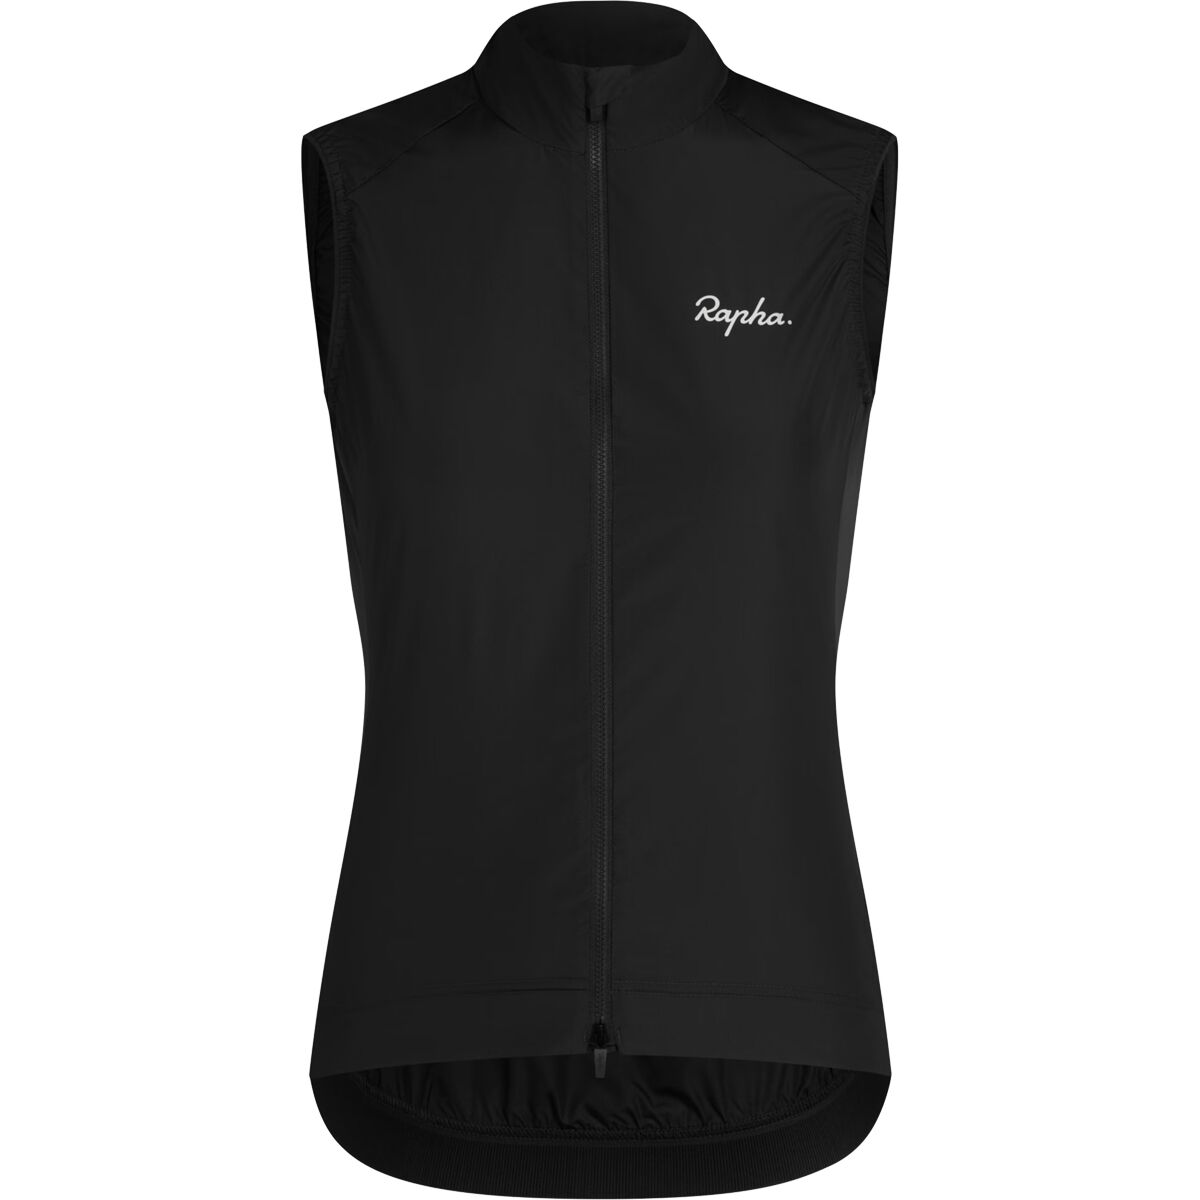 Rapha Classic Winter Bib Tight - Men's Black, S - In The Know Cycling